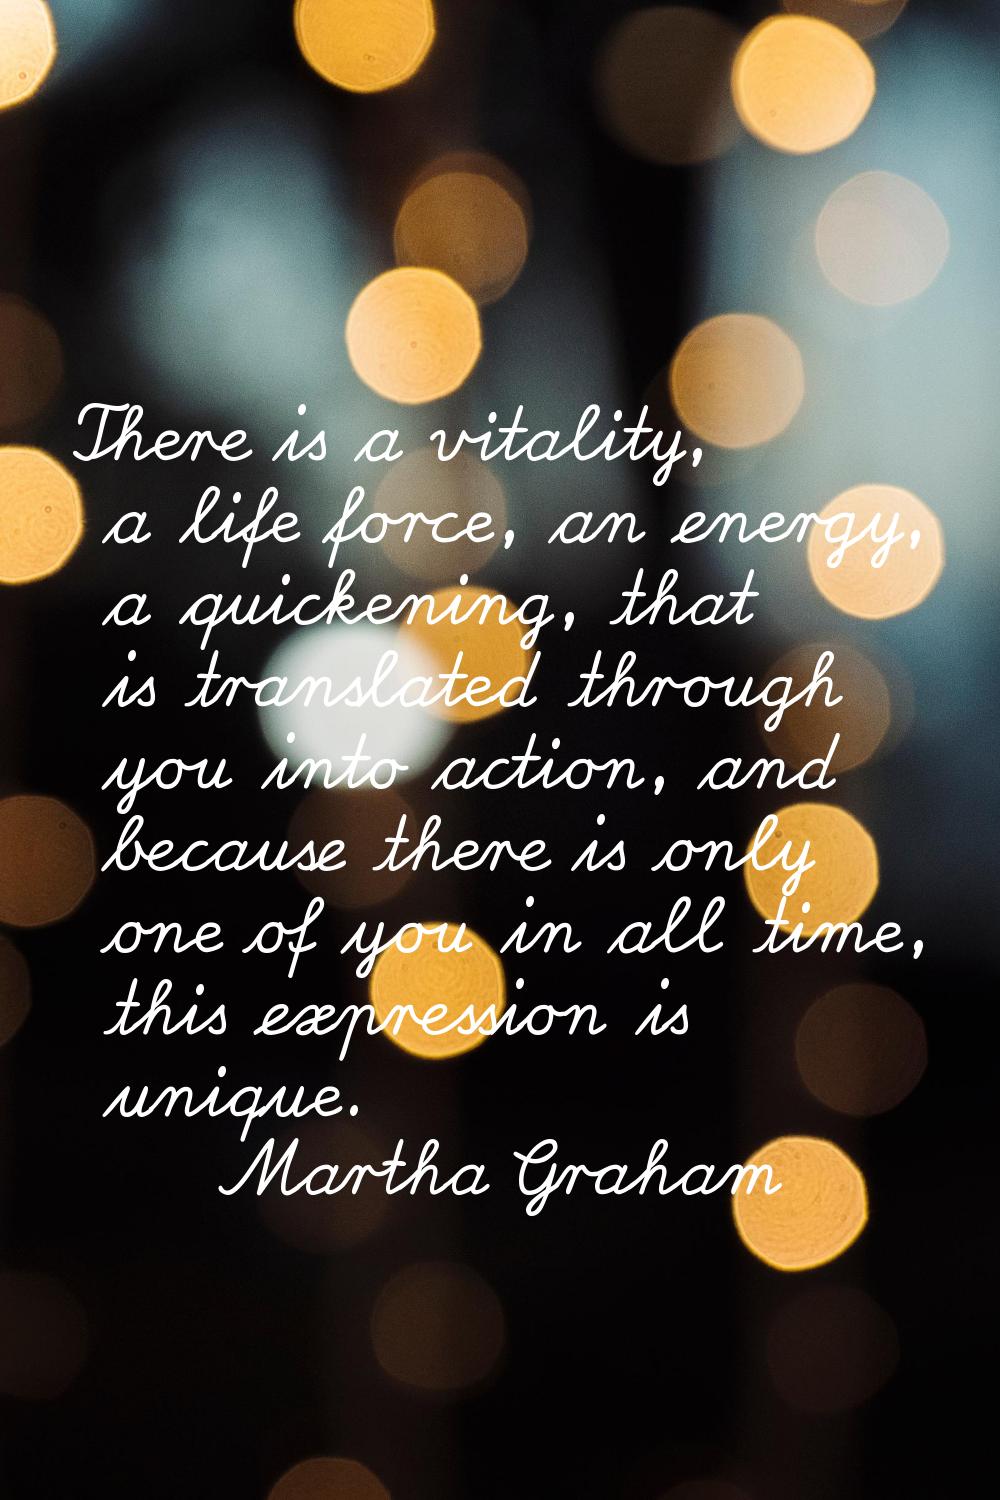 There is a vitality, a life force, an energy, a quickening, that is translated through you into act